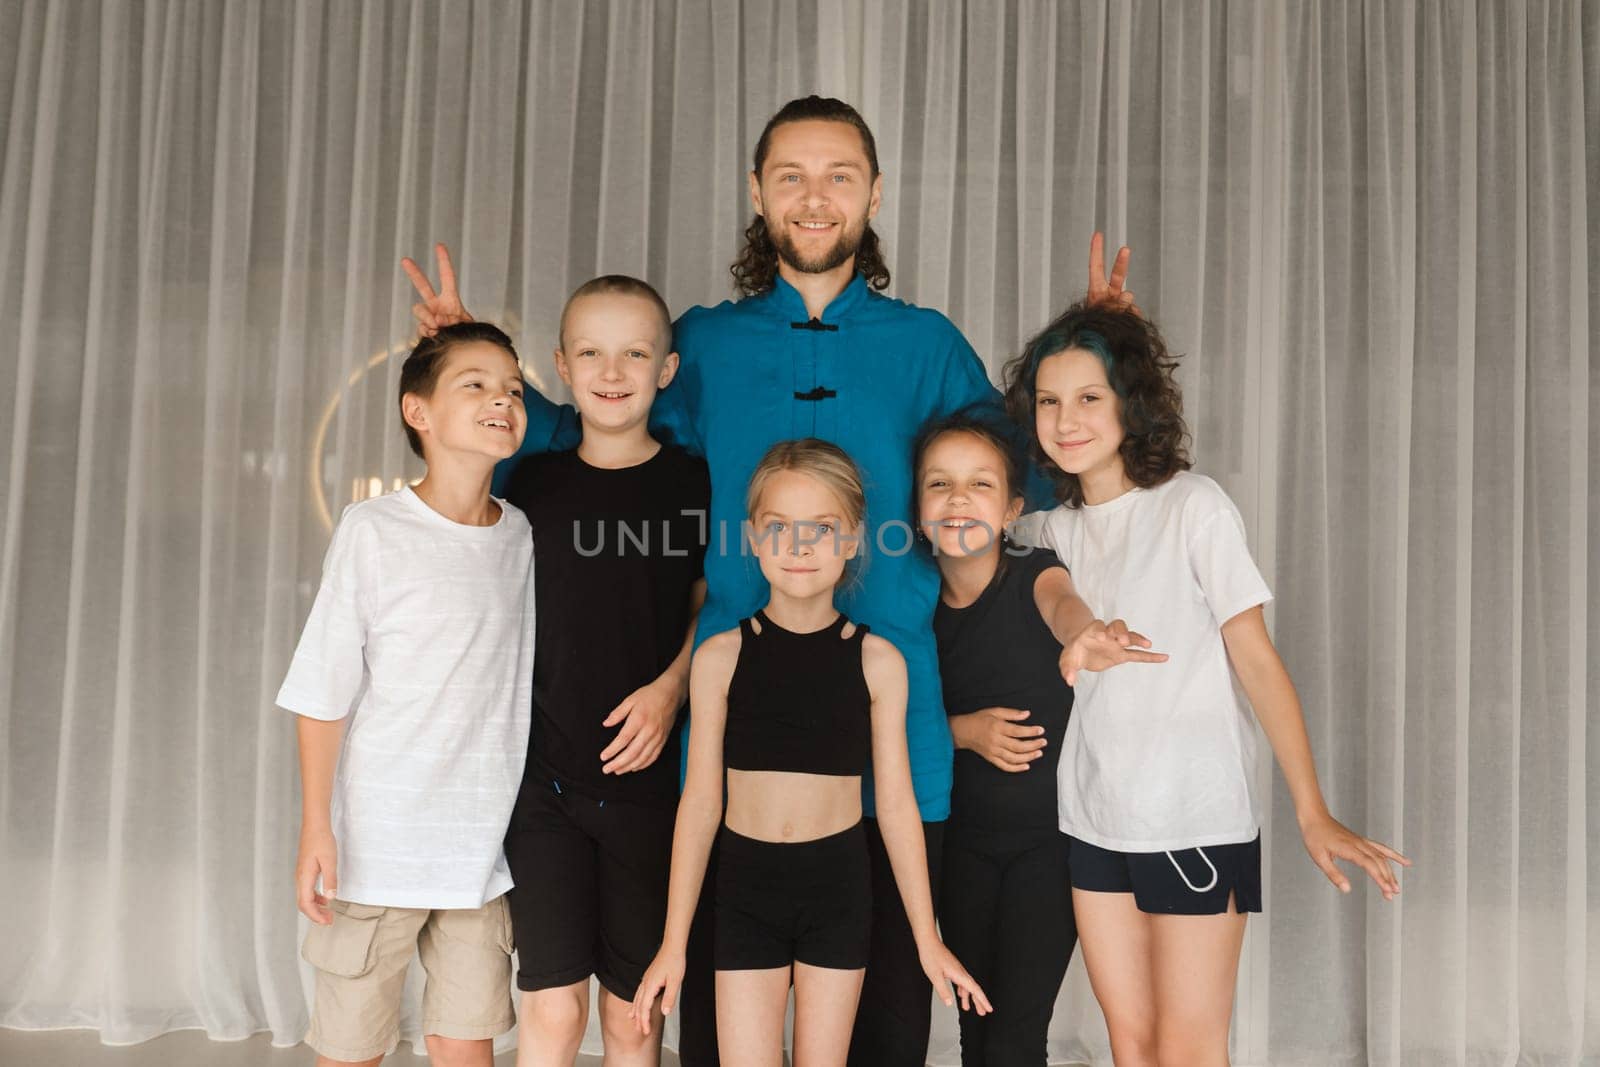 A joint portrait of a yoga coach and children standing in a fitness room.